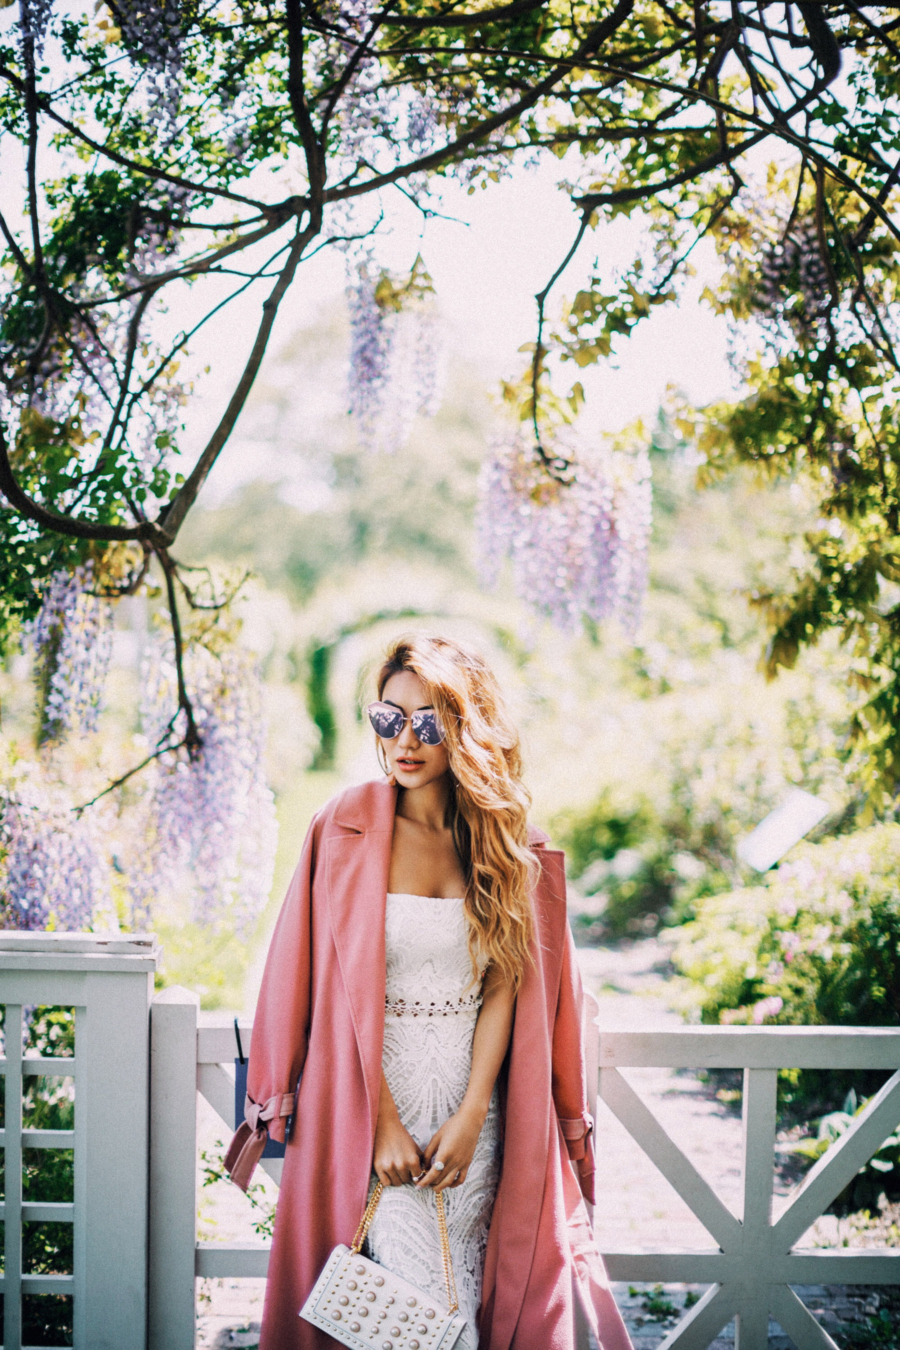 Pink White Outfit - 9 Fresh Ways To Style Your Favorite Trench Coat For Any Occasion This Spring // NotJessFashion.com